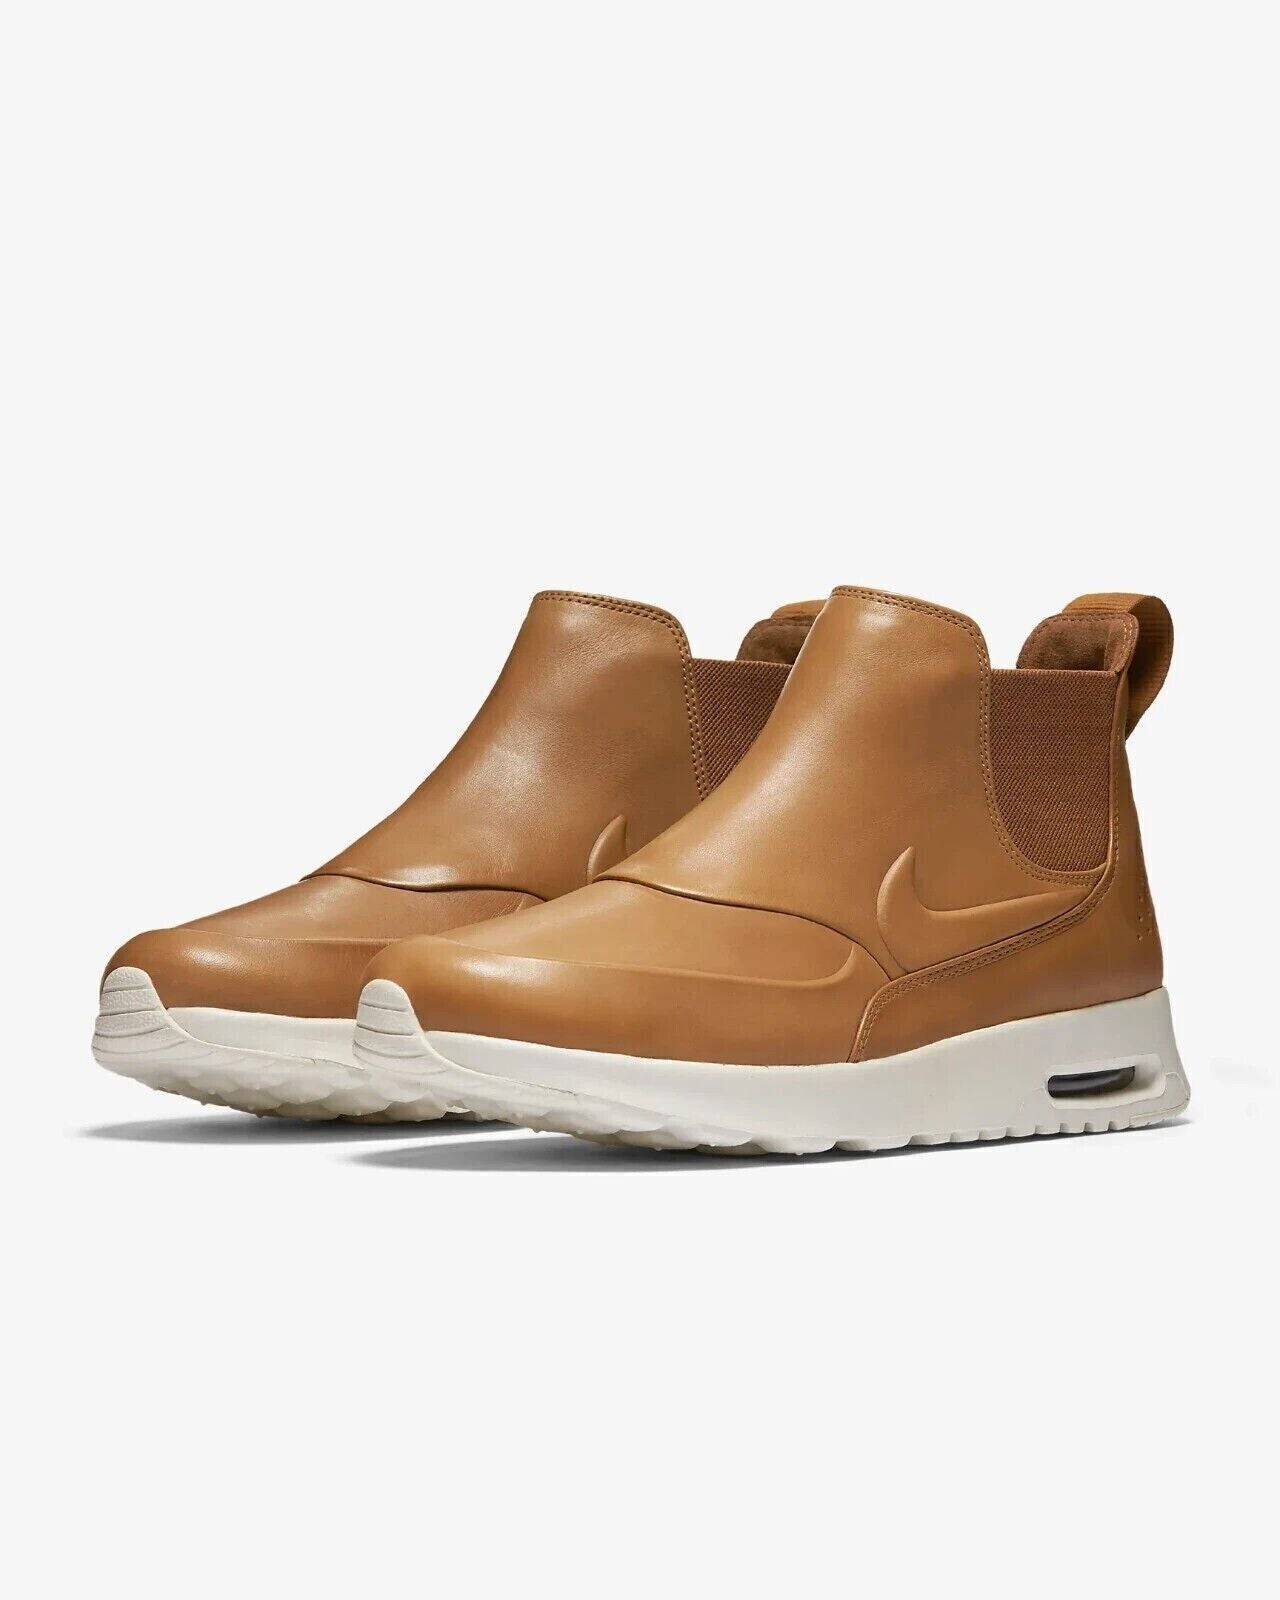 Shop Nike Air Max Thea Mid 859550-200 Women's Ale Brown Sail Leather Shoes Gas45